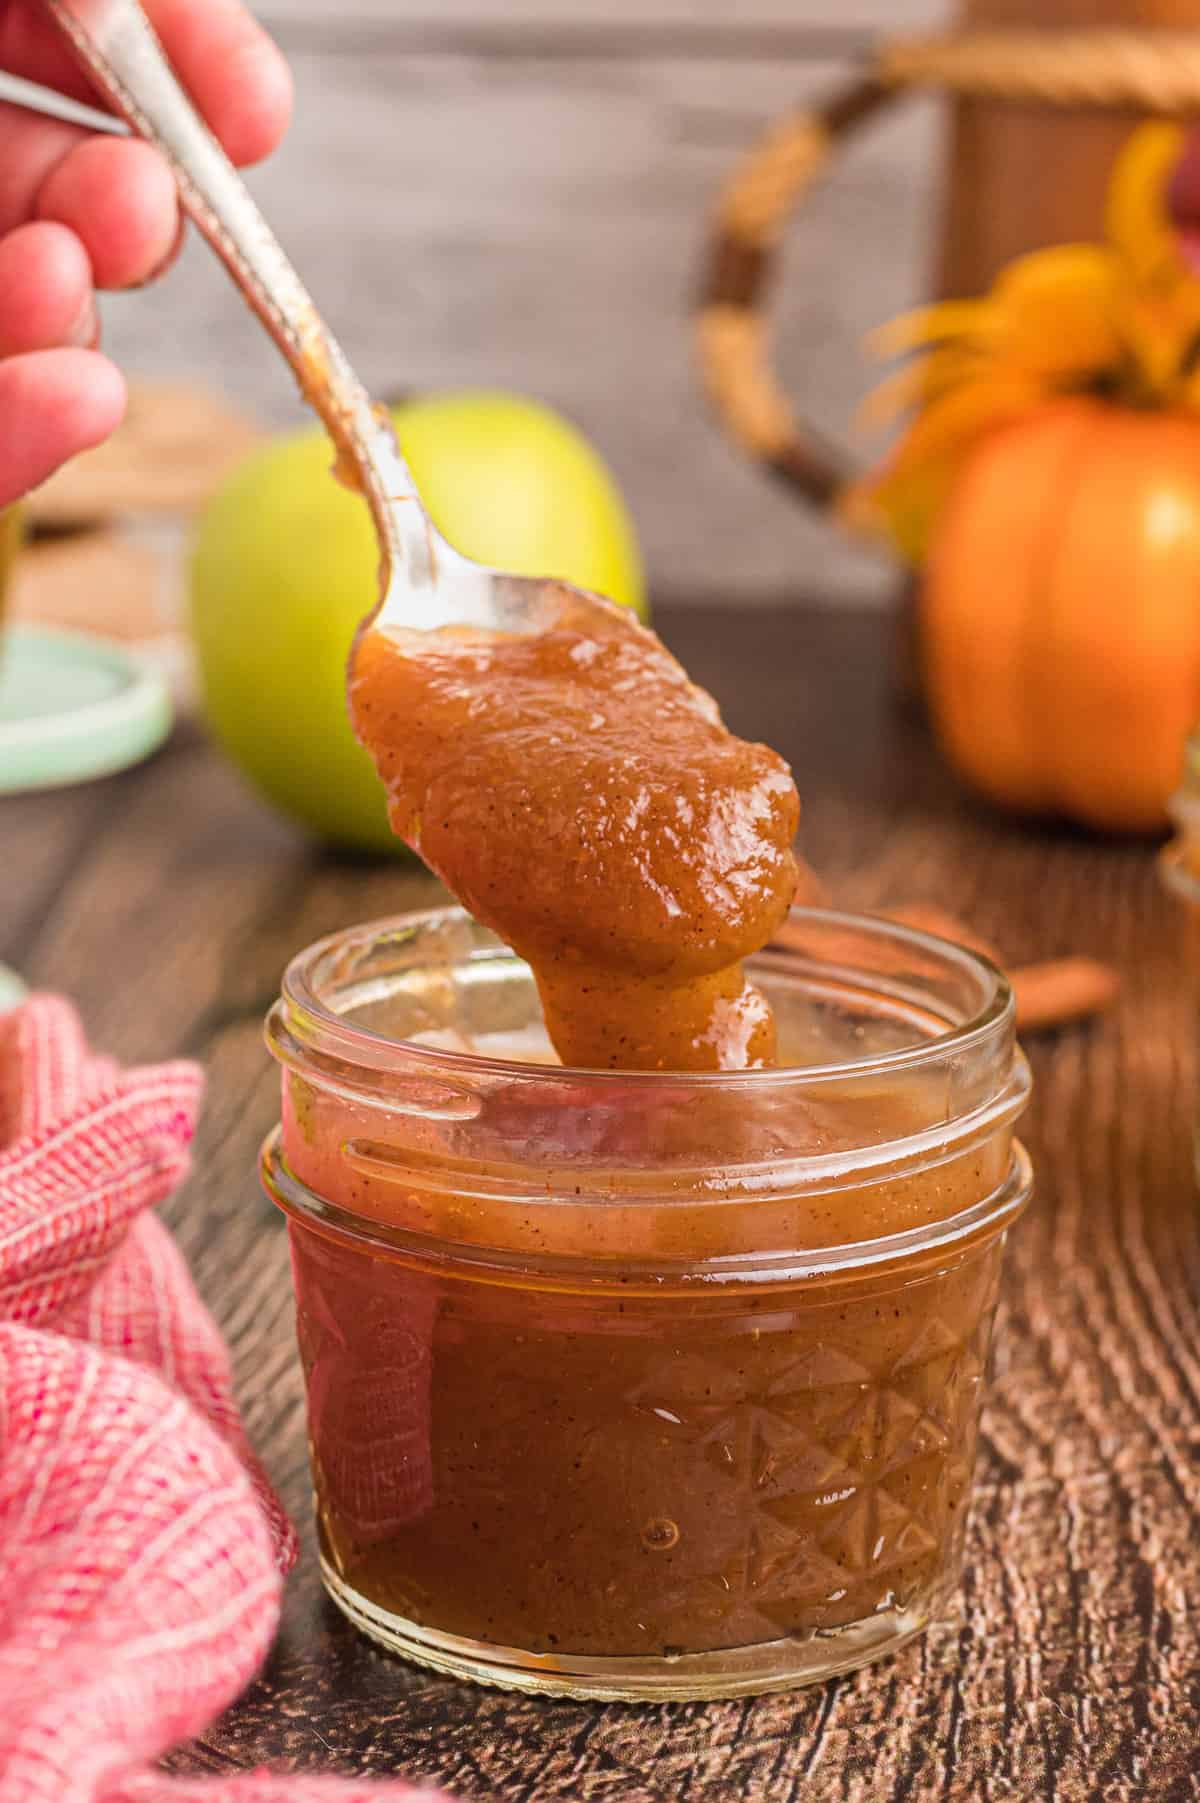 Apple butter in a small jar with spoon.